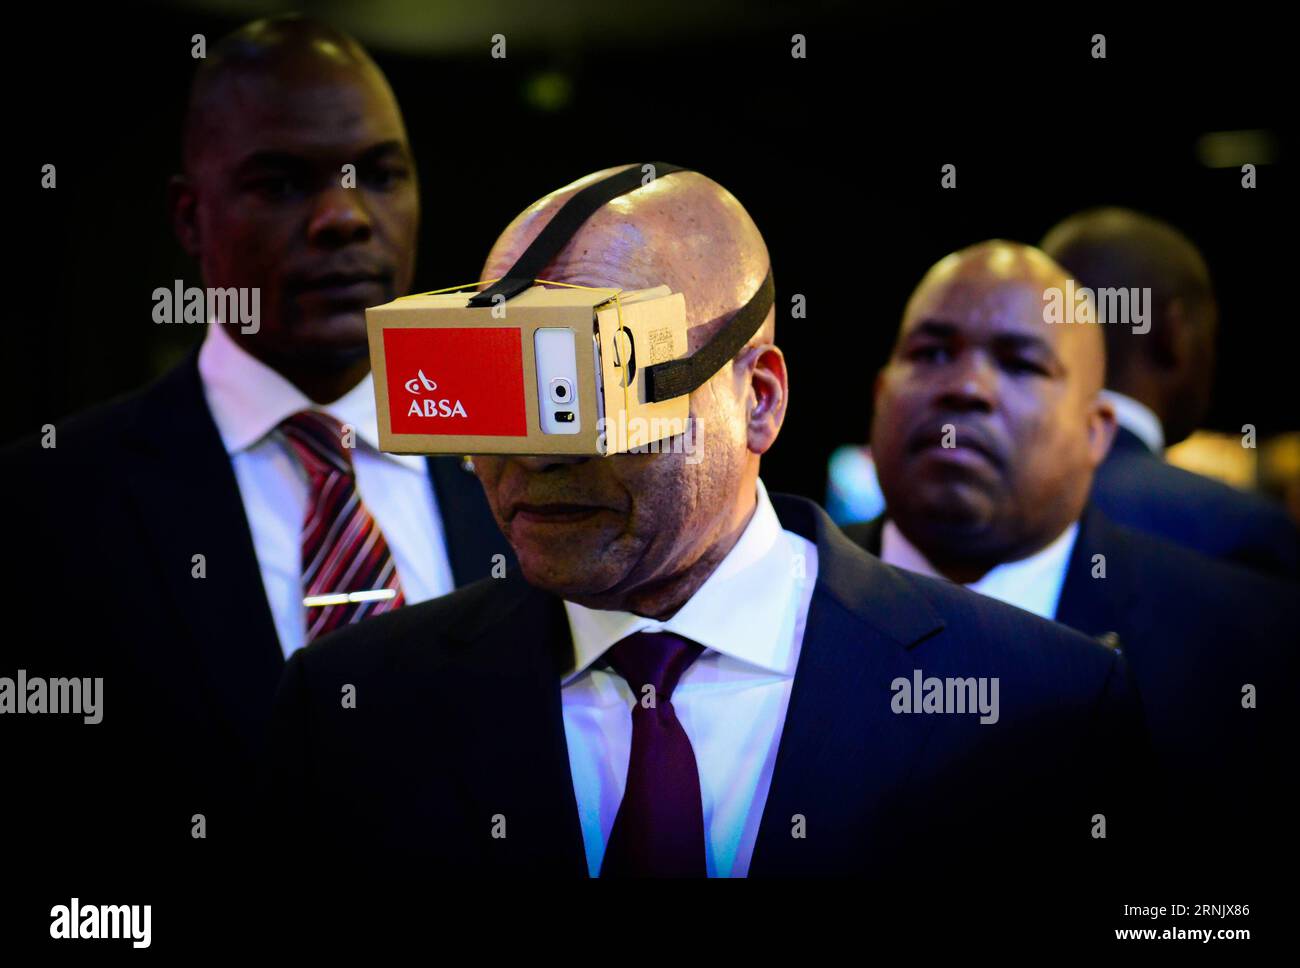 (170217) -- JOHANNESBURG, Feb. 17, 2017 -- File photo taken on April 7, 2016 shows South African President Jacob Zuma tries a VR device provided by Amalgamated Banks of South Africa (ABSA) during the launch of the eChannel Pilot Project of the Department of Home Affairs at Gallagher Convention Center in Midrand, near Johannesburg,?South?Africa.?The South African government is prepared to act against market abuse, price-fixing and collusion in the private sector in order to protect the country s economy, President Jacob Zuma said on Feb. 16, 2017. Zuma was speaking after the Competition Commiss Stock Photo